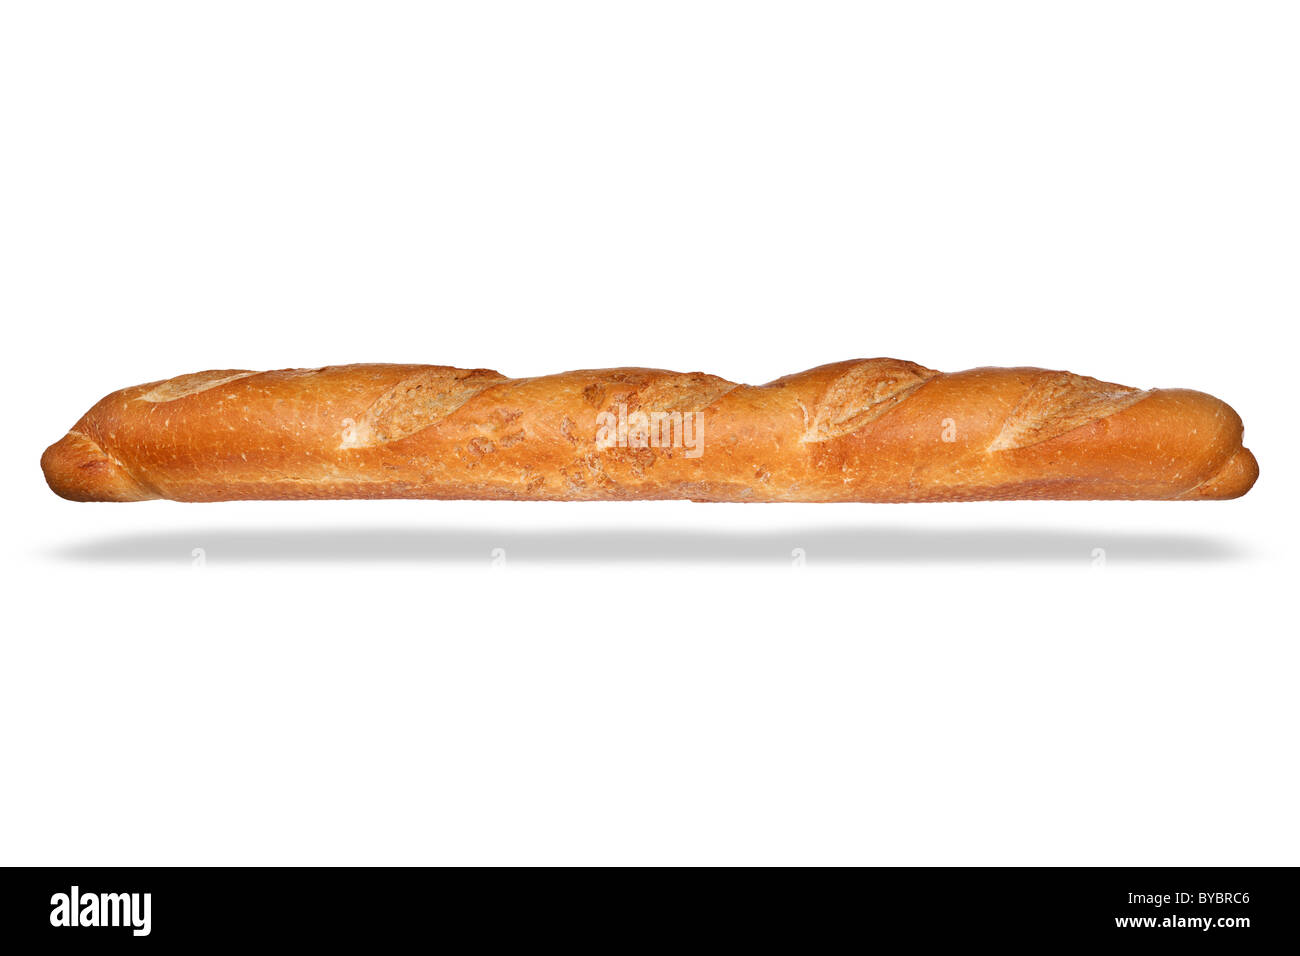 Photo of a loaf of French bread, isolated on a white background with floating shadow. Stock Photo